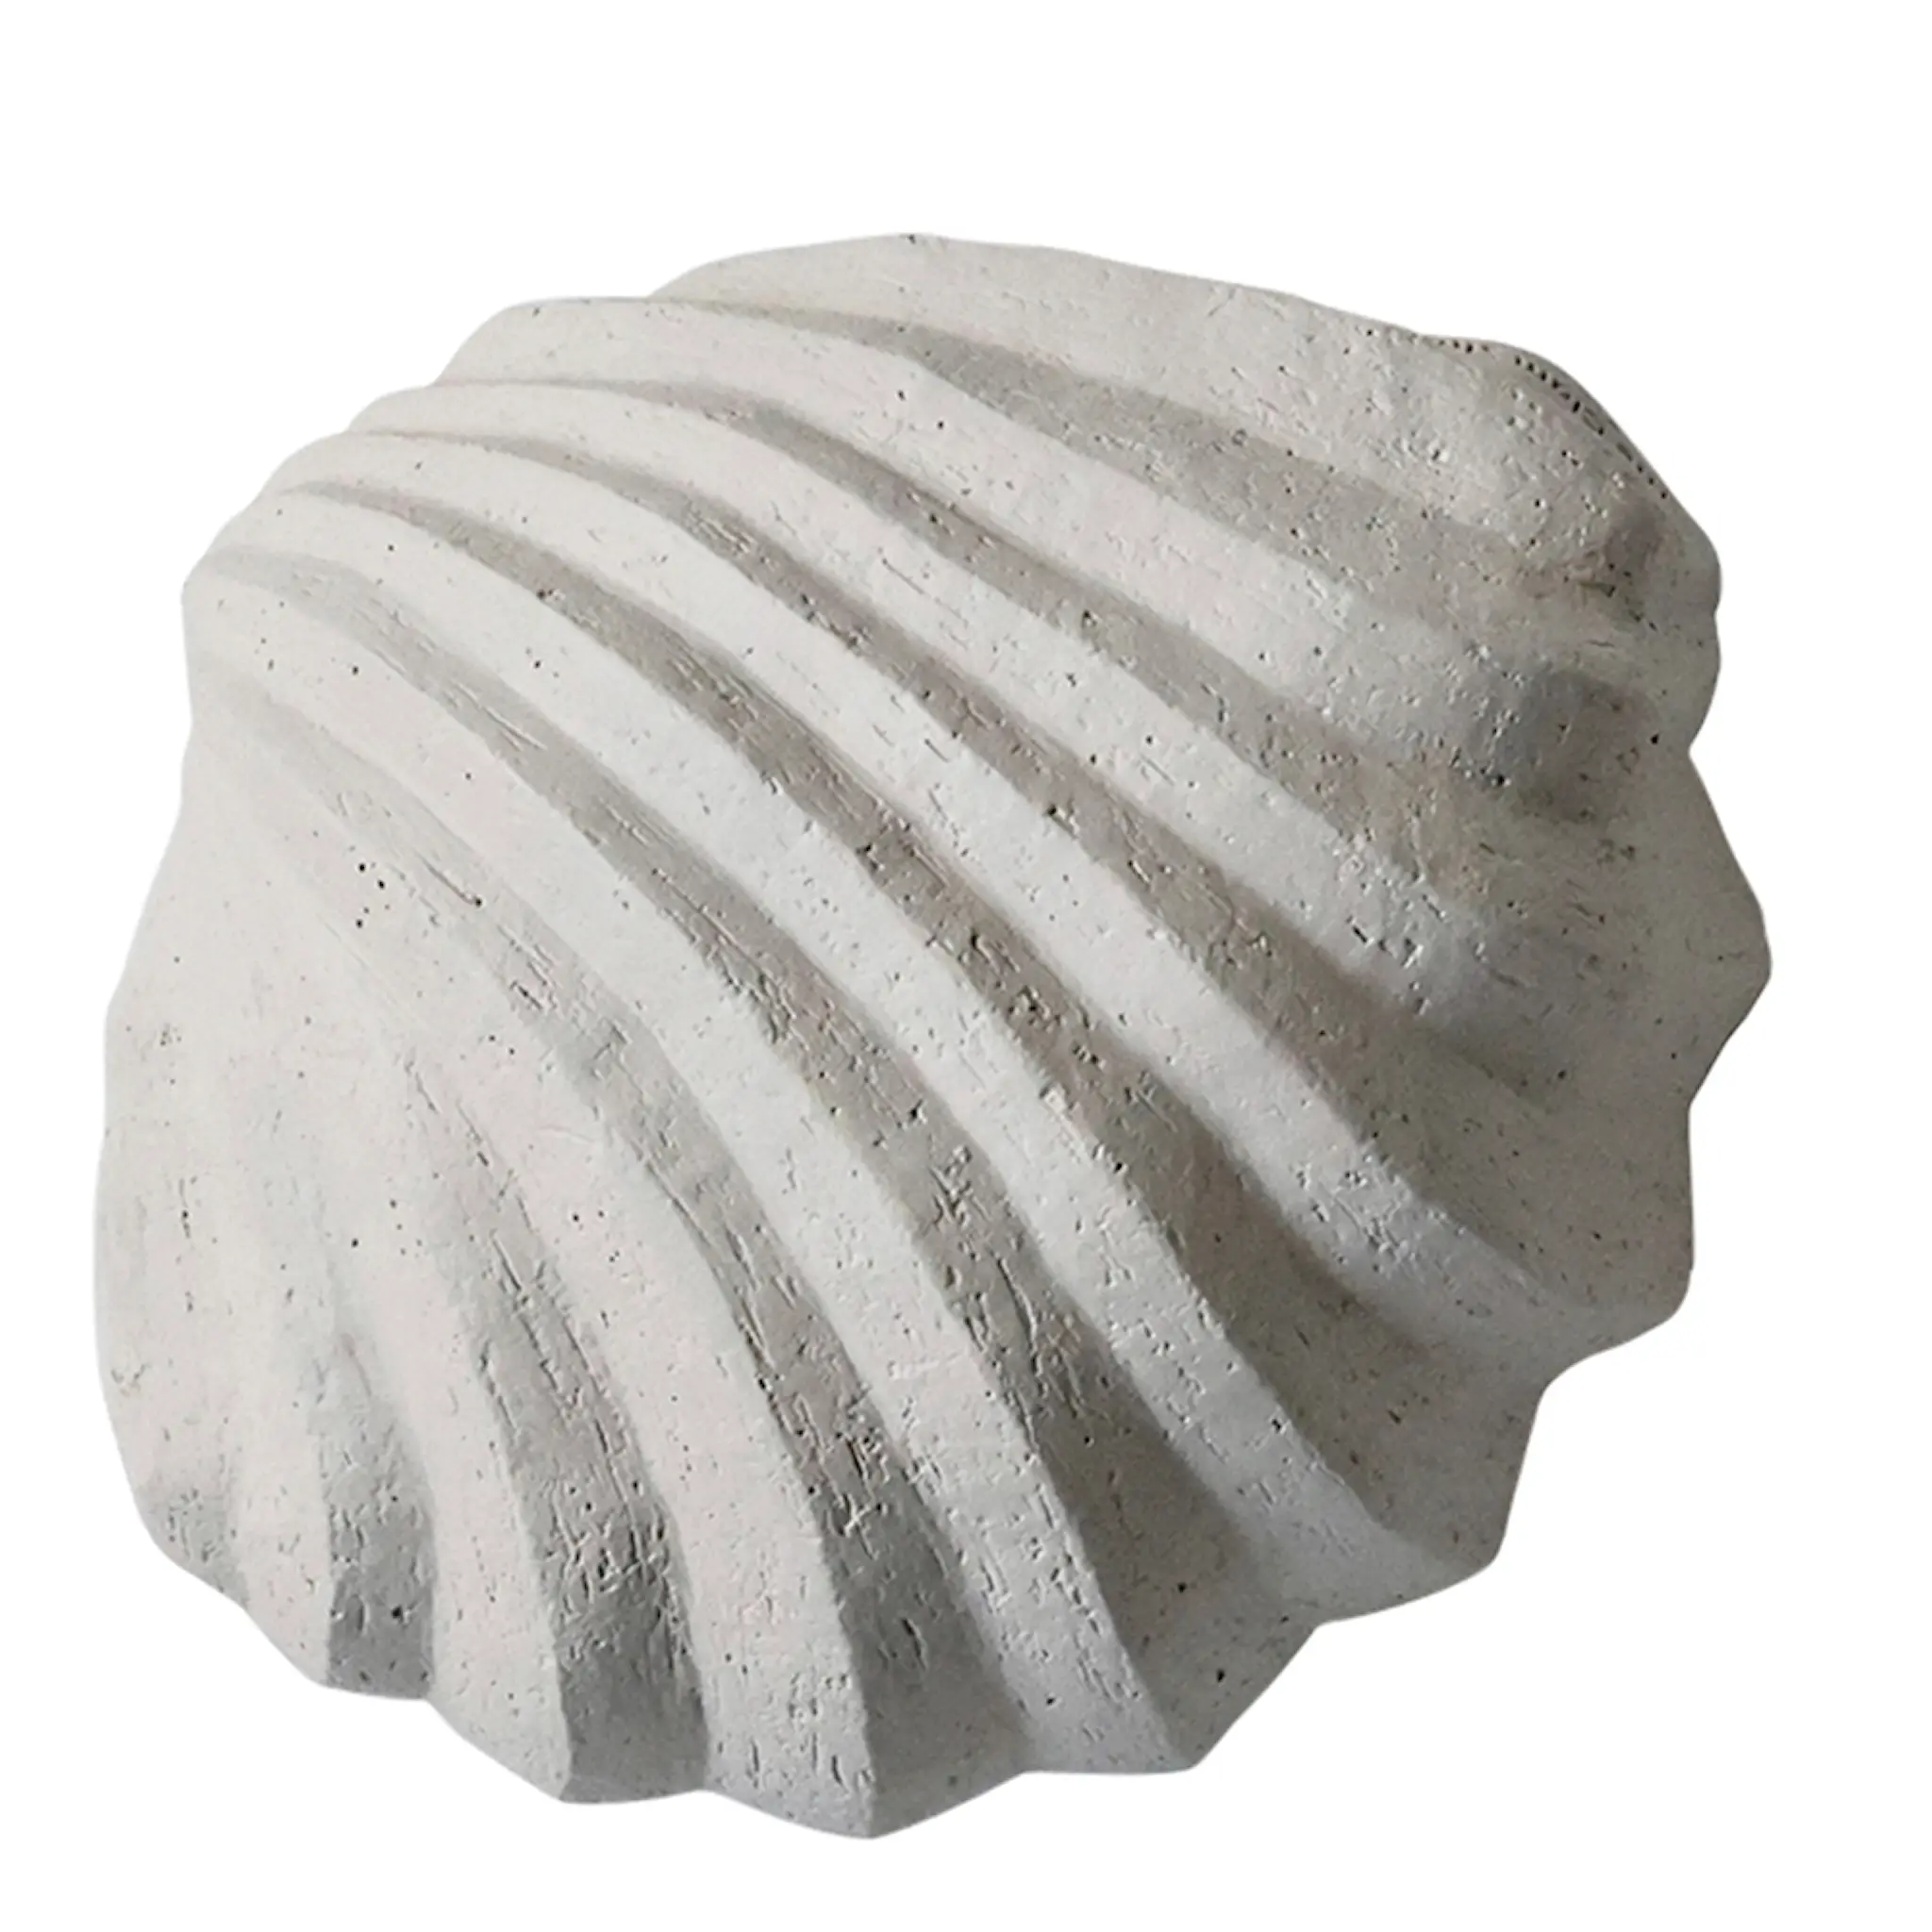 Cooee The clam shell skulptur limestone